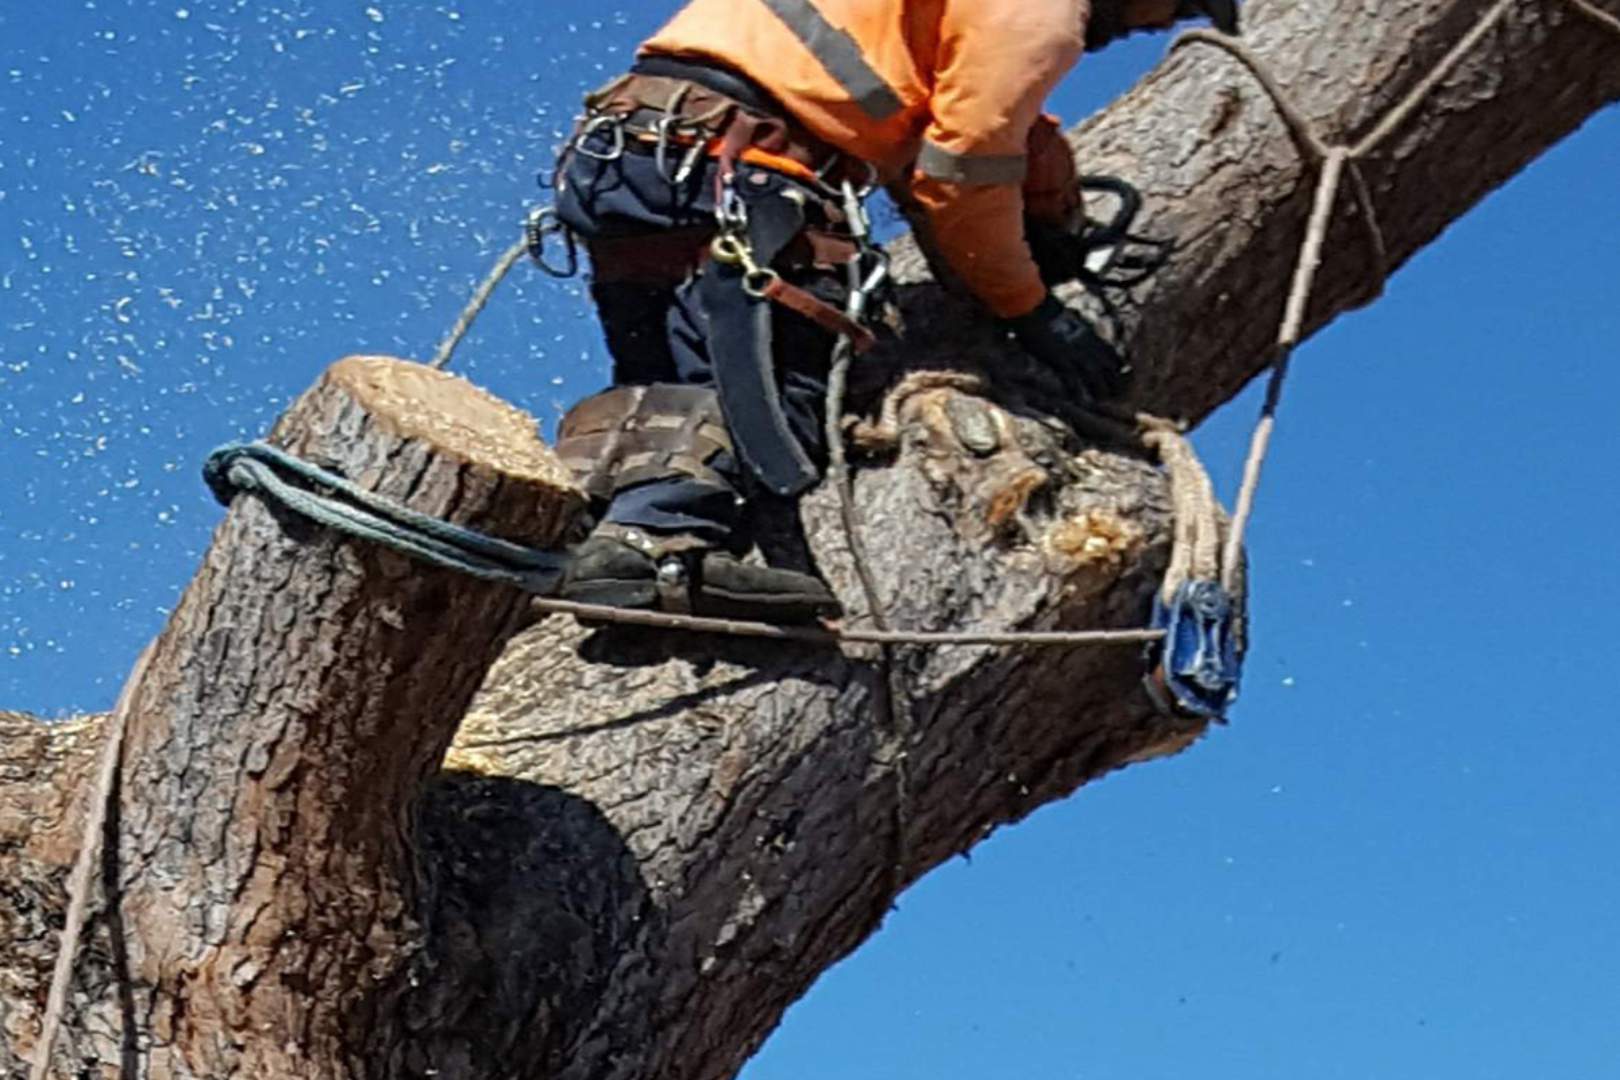 climber getting ready for tree removal